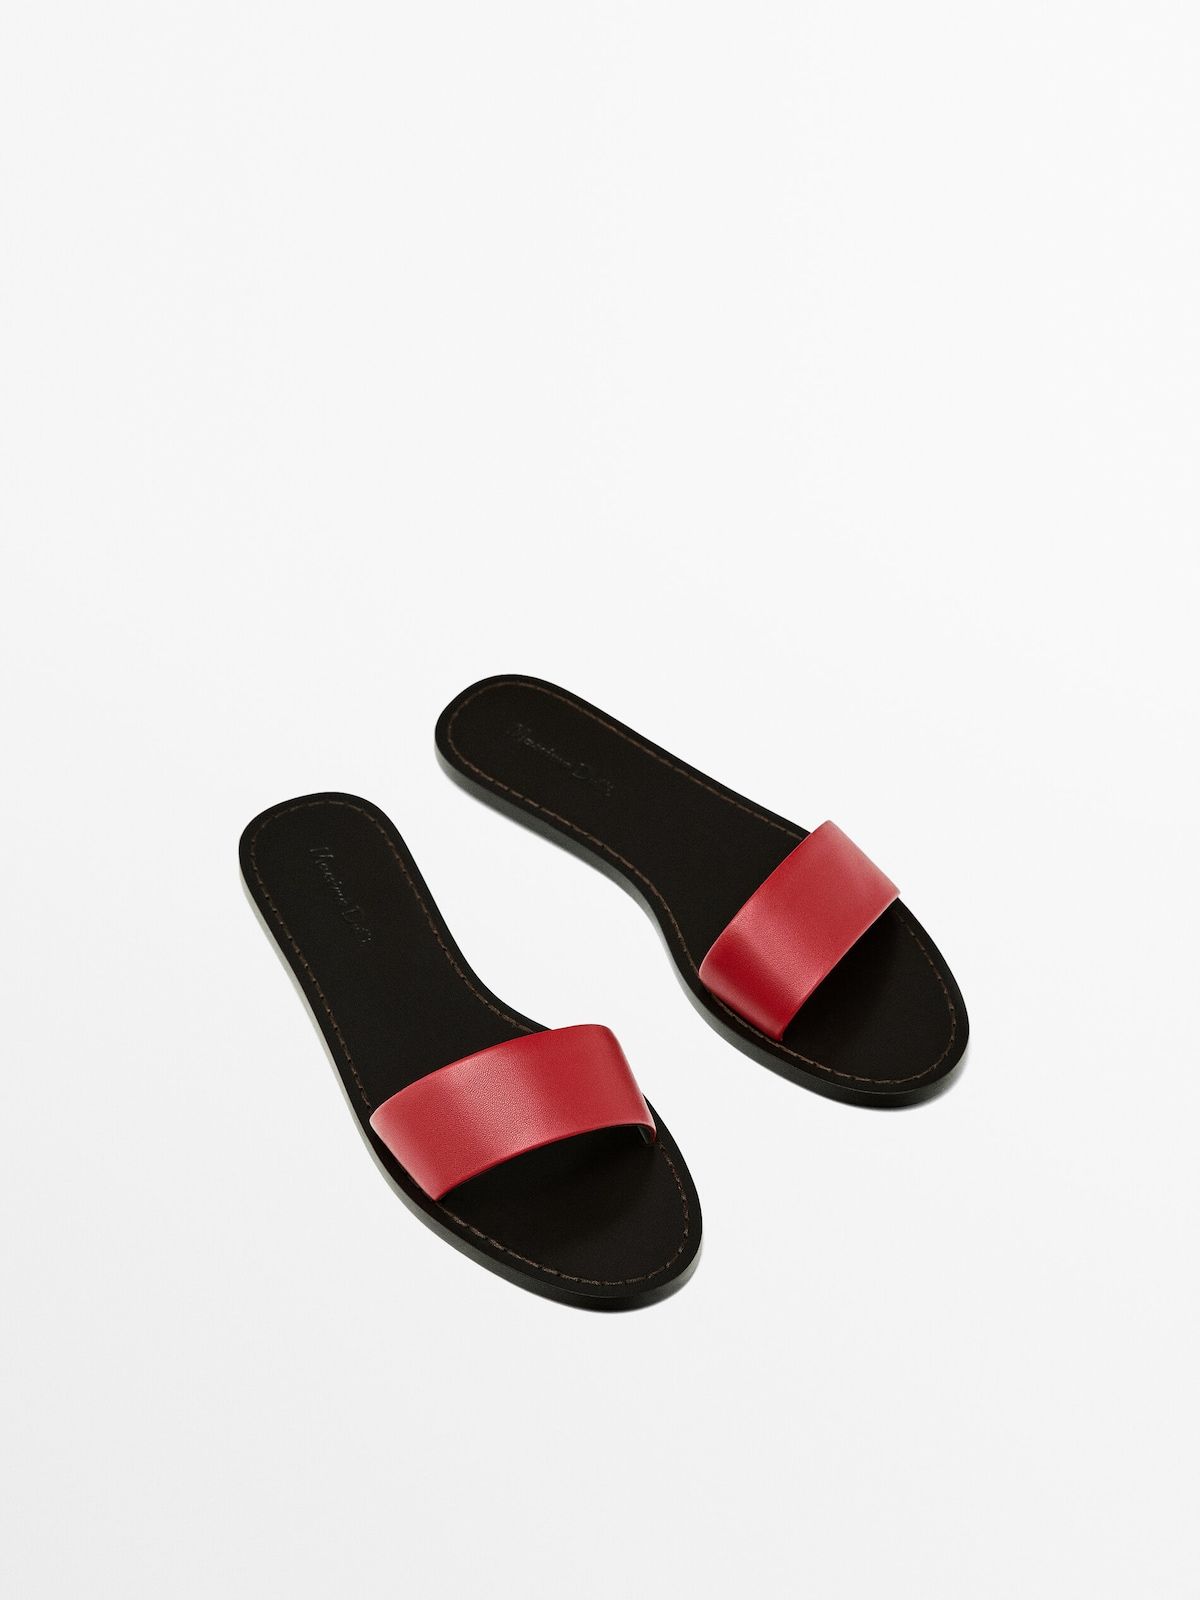 Slider sandals with leather strap | Massimo Dutti UK